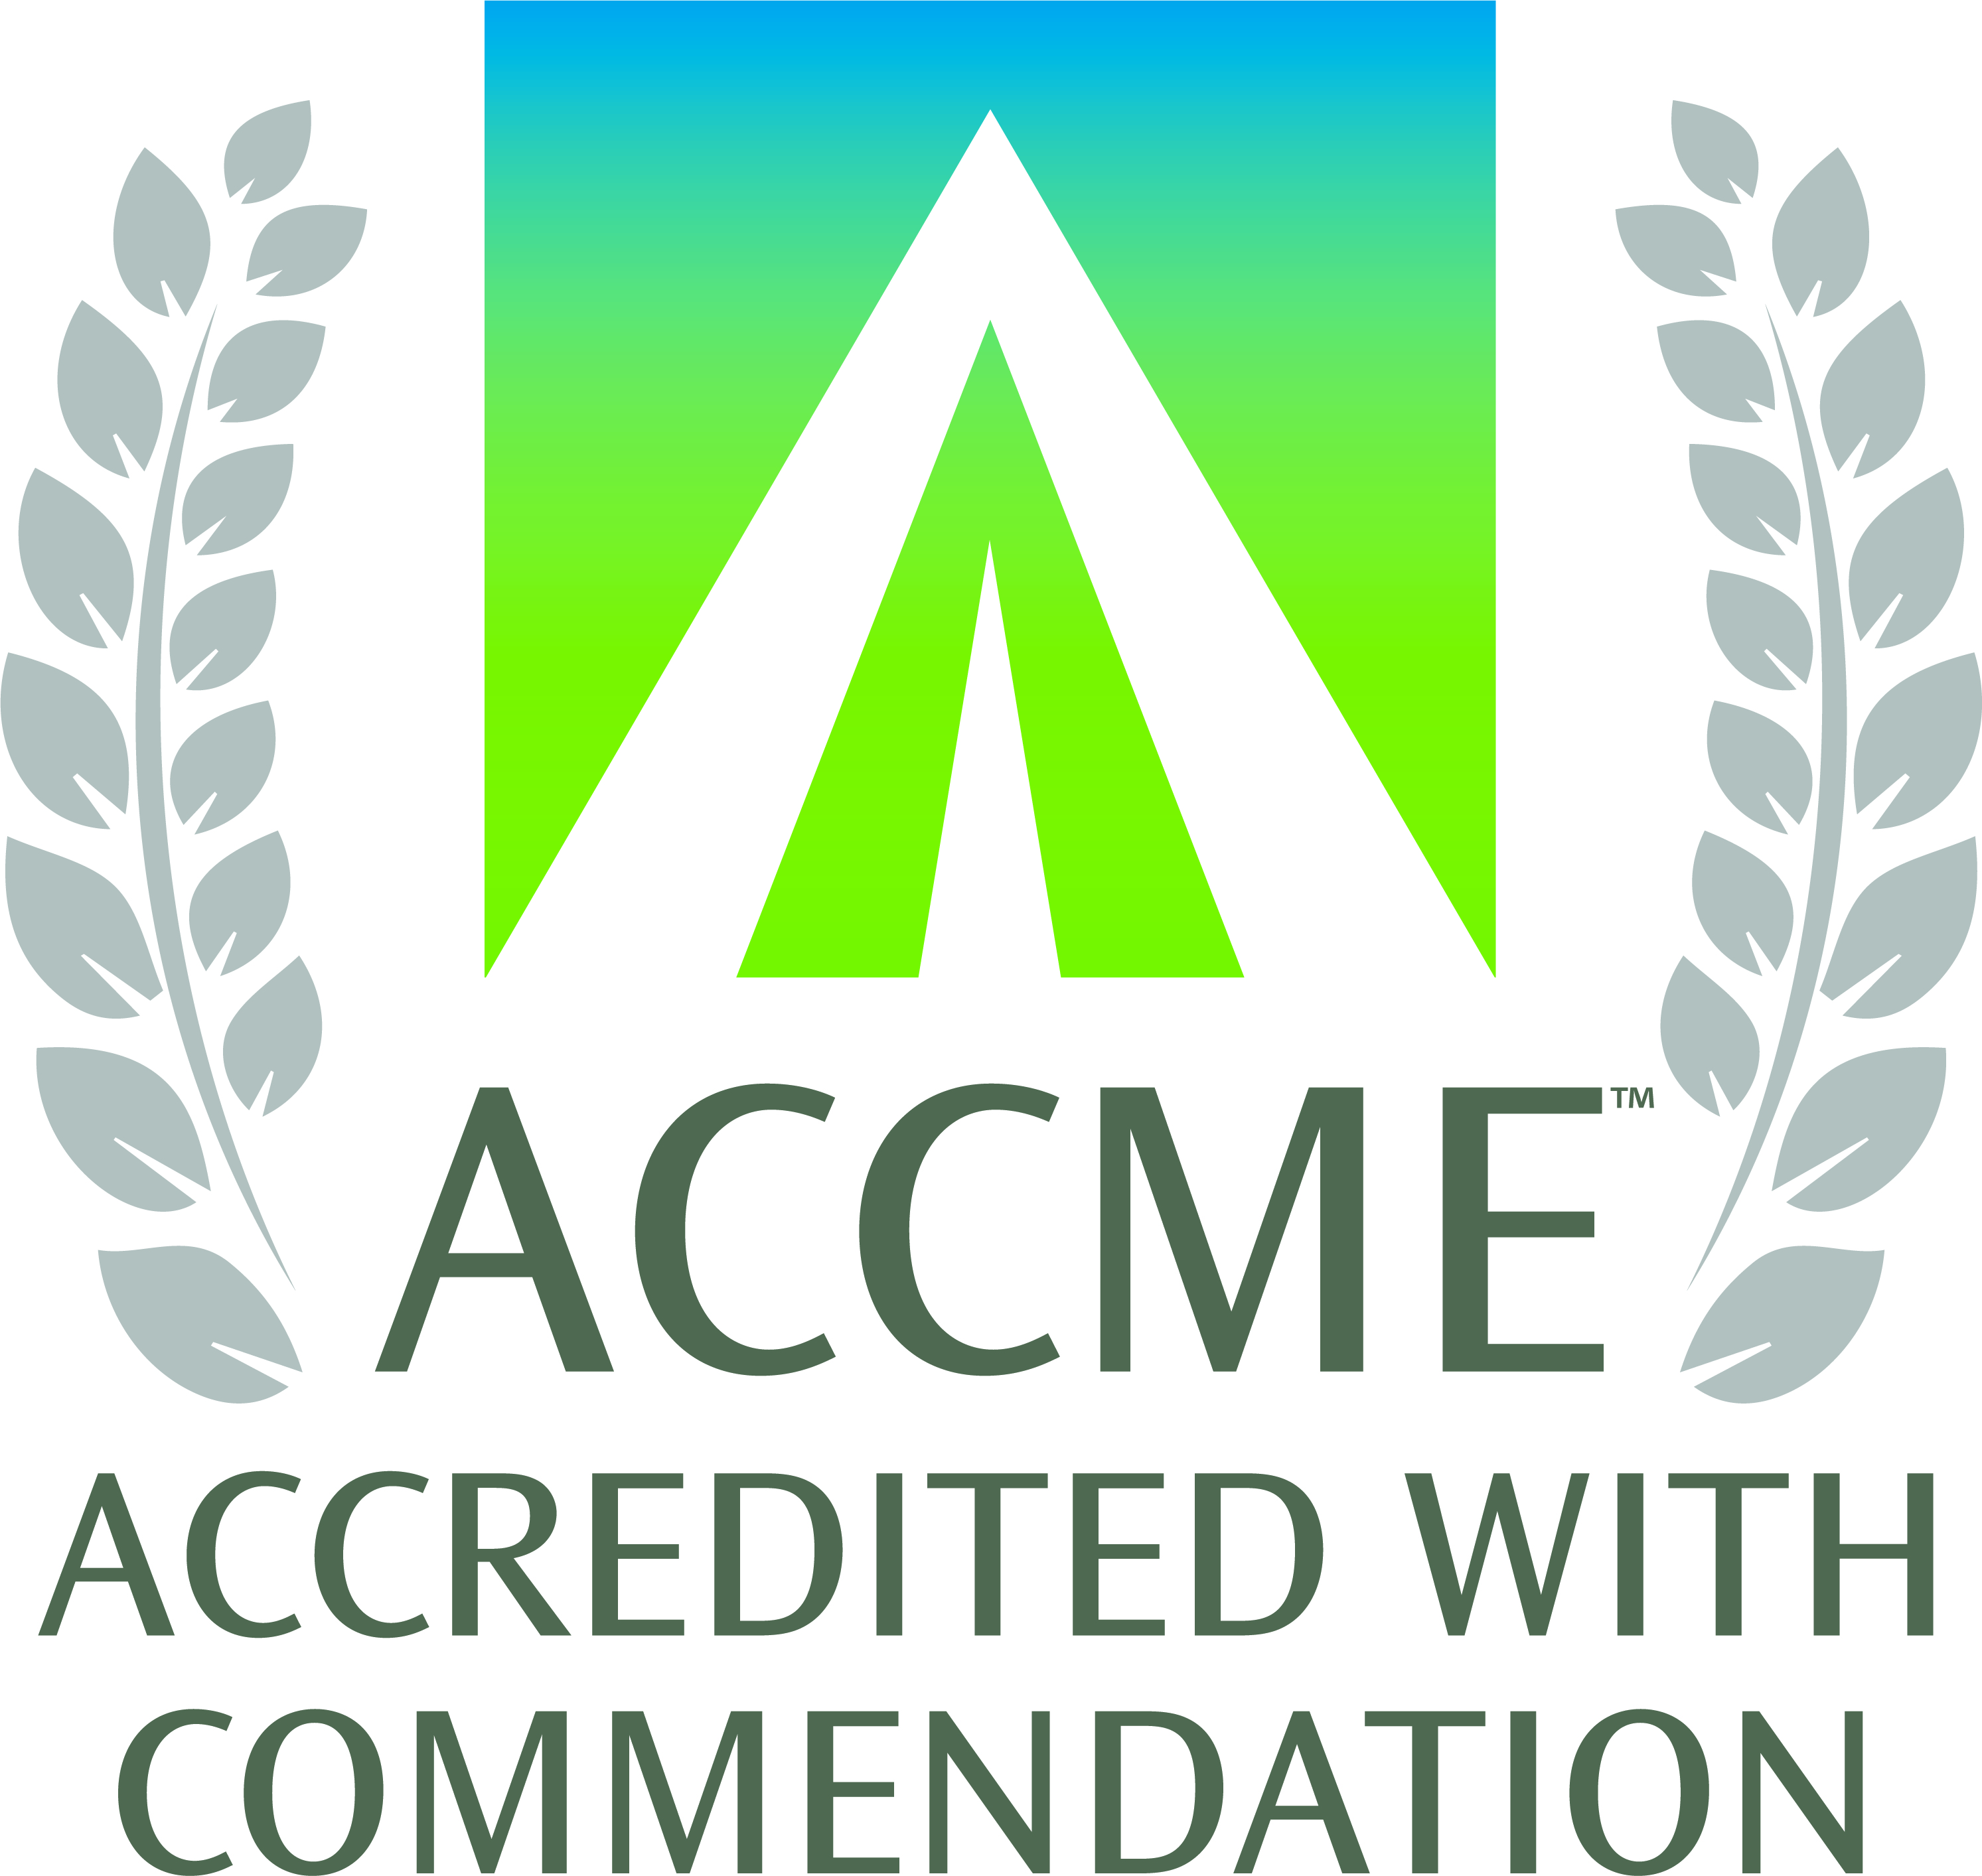 ACCME commendation full color